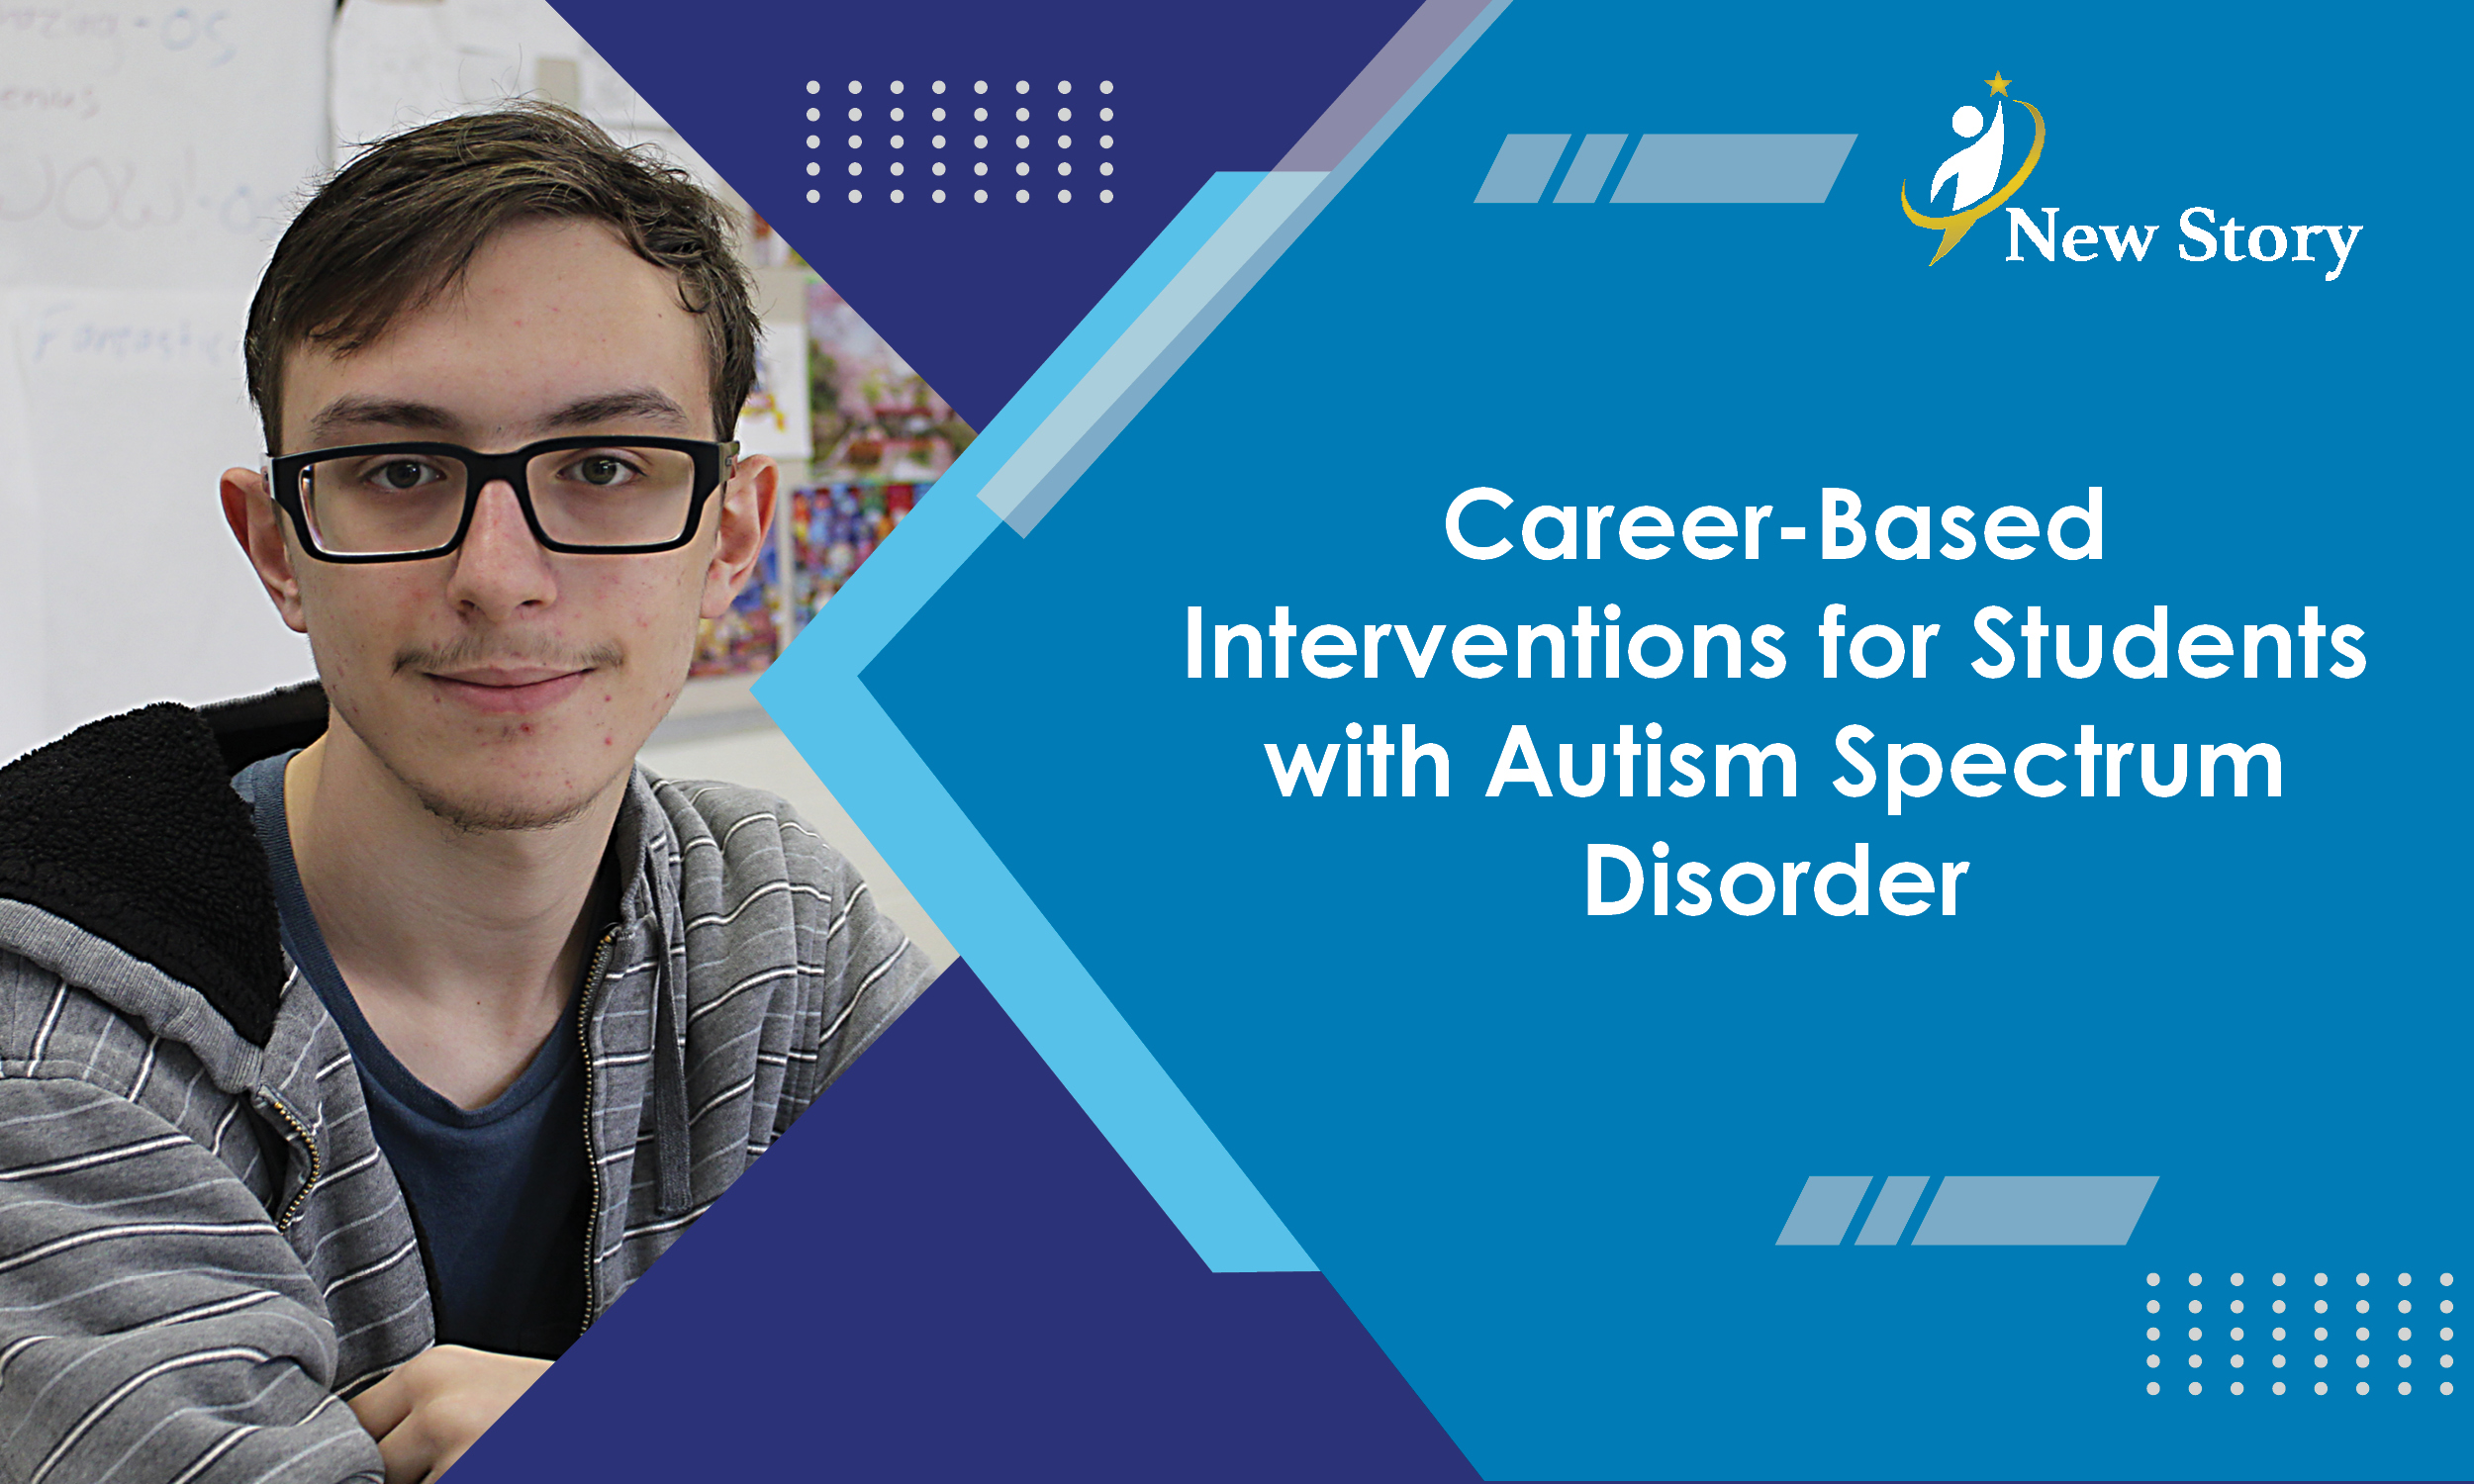 Career-Based Interventions for Students with Autism Spectrum Disorder